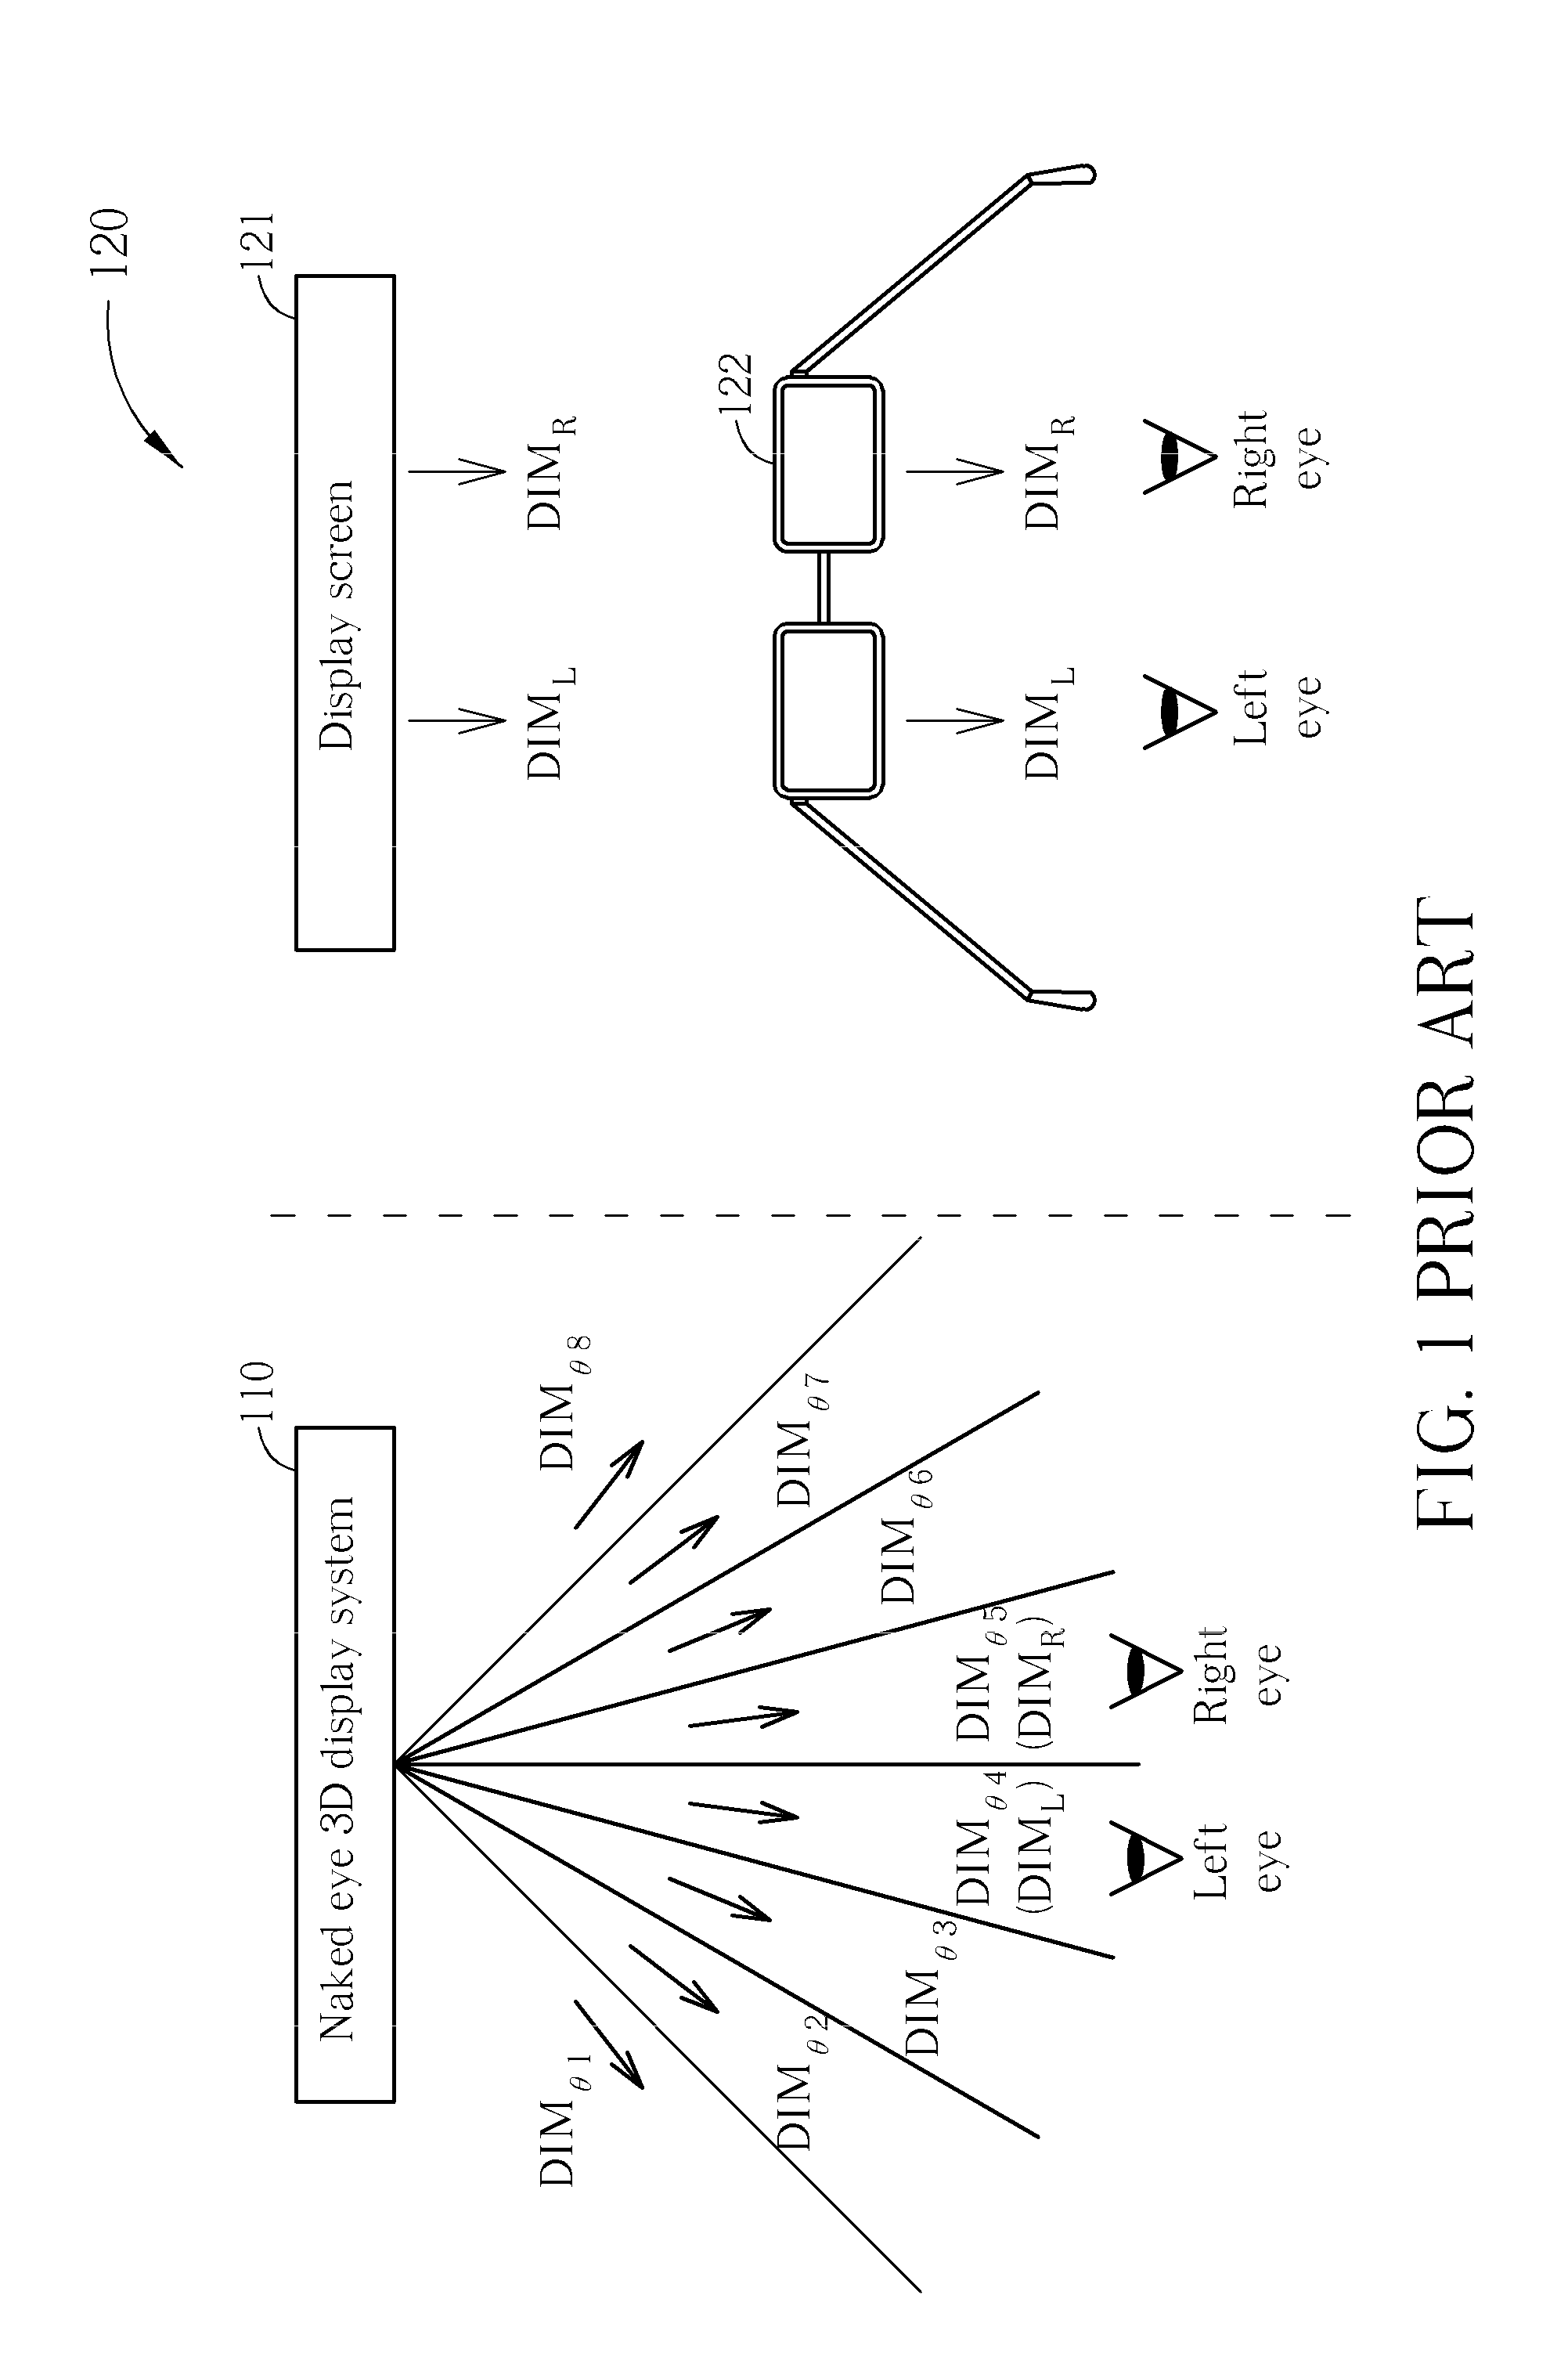 Interactive module applied in 3D interactive system and method